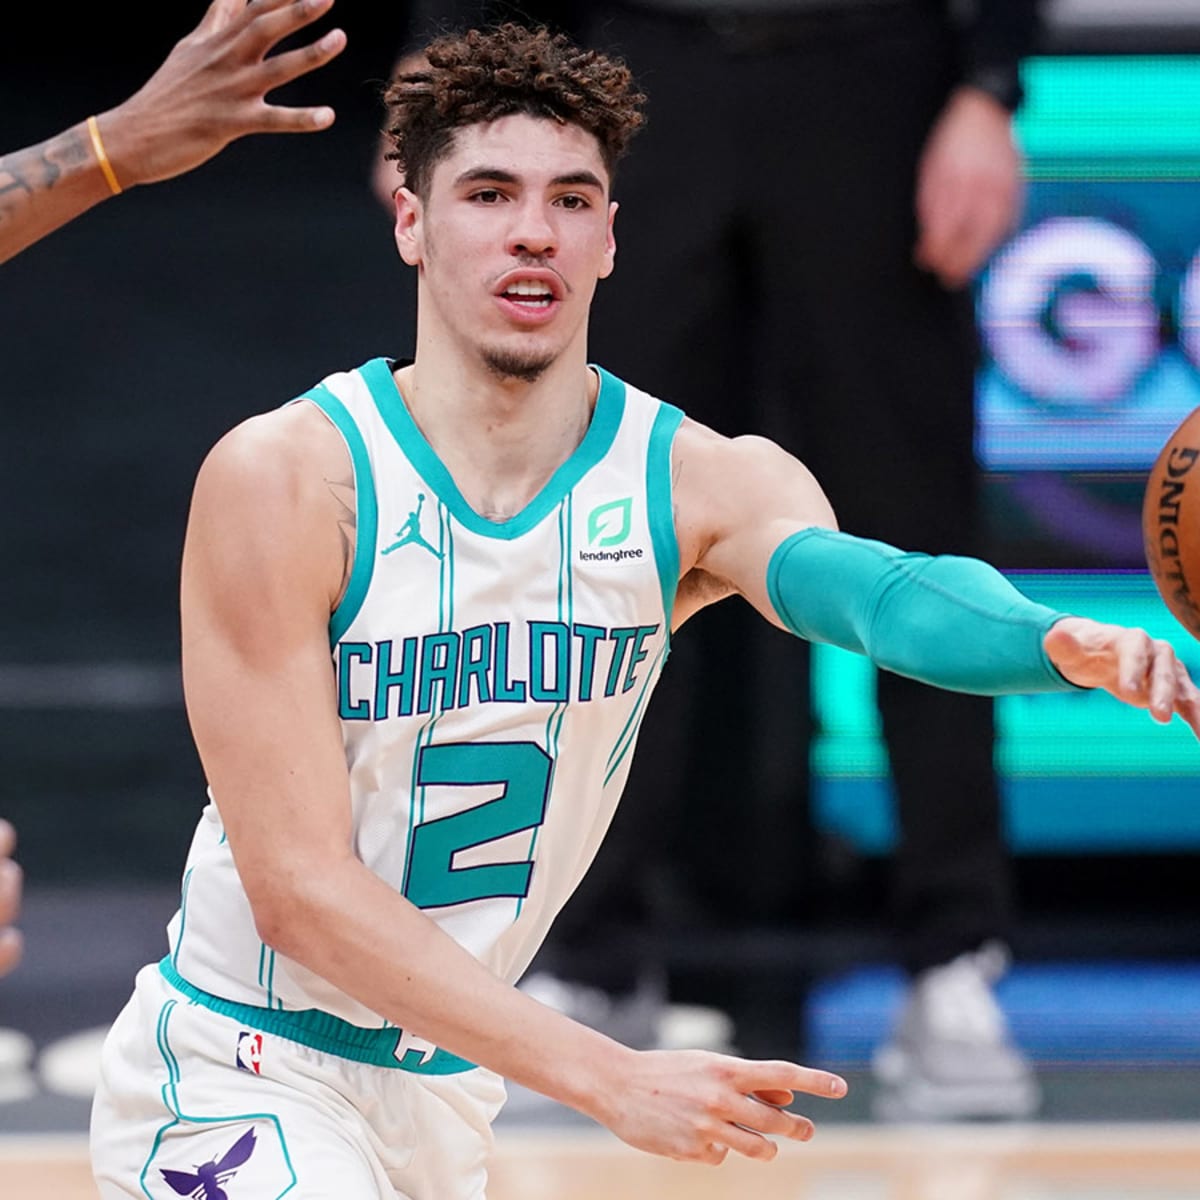 Pacers visit Hornets, LaMelo Ball in NBA action